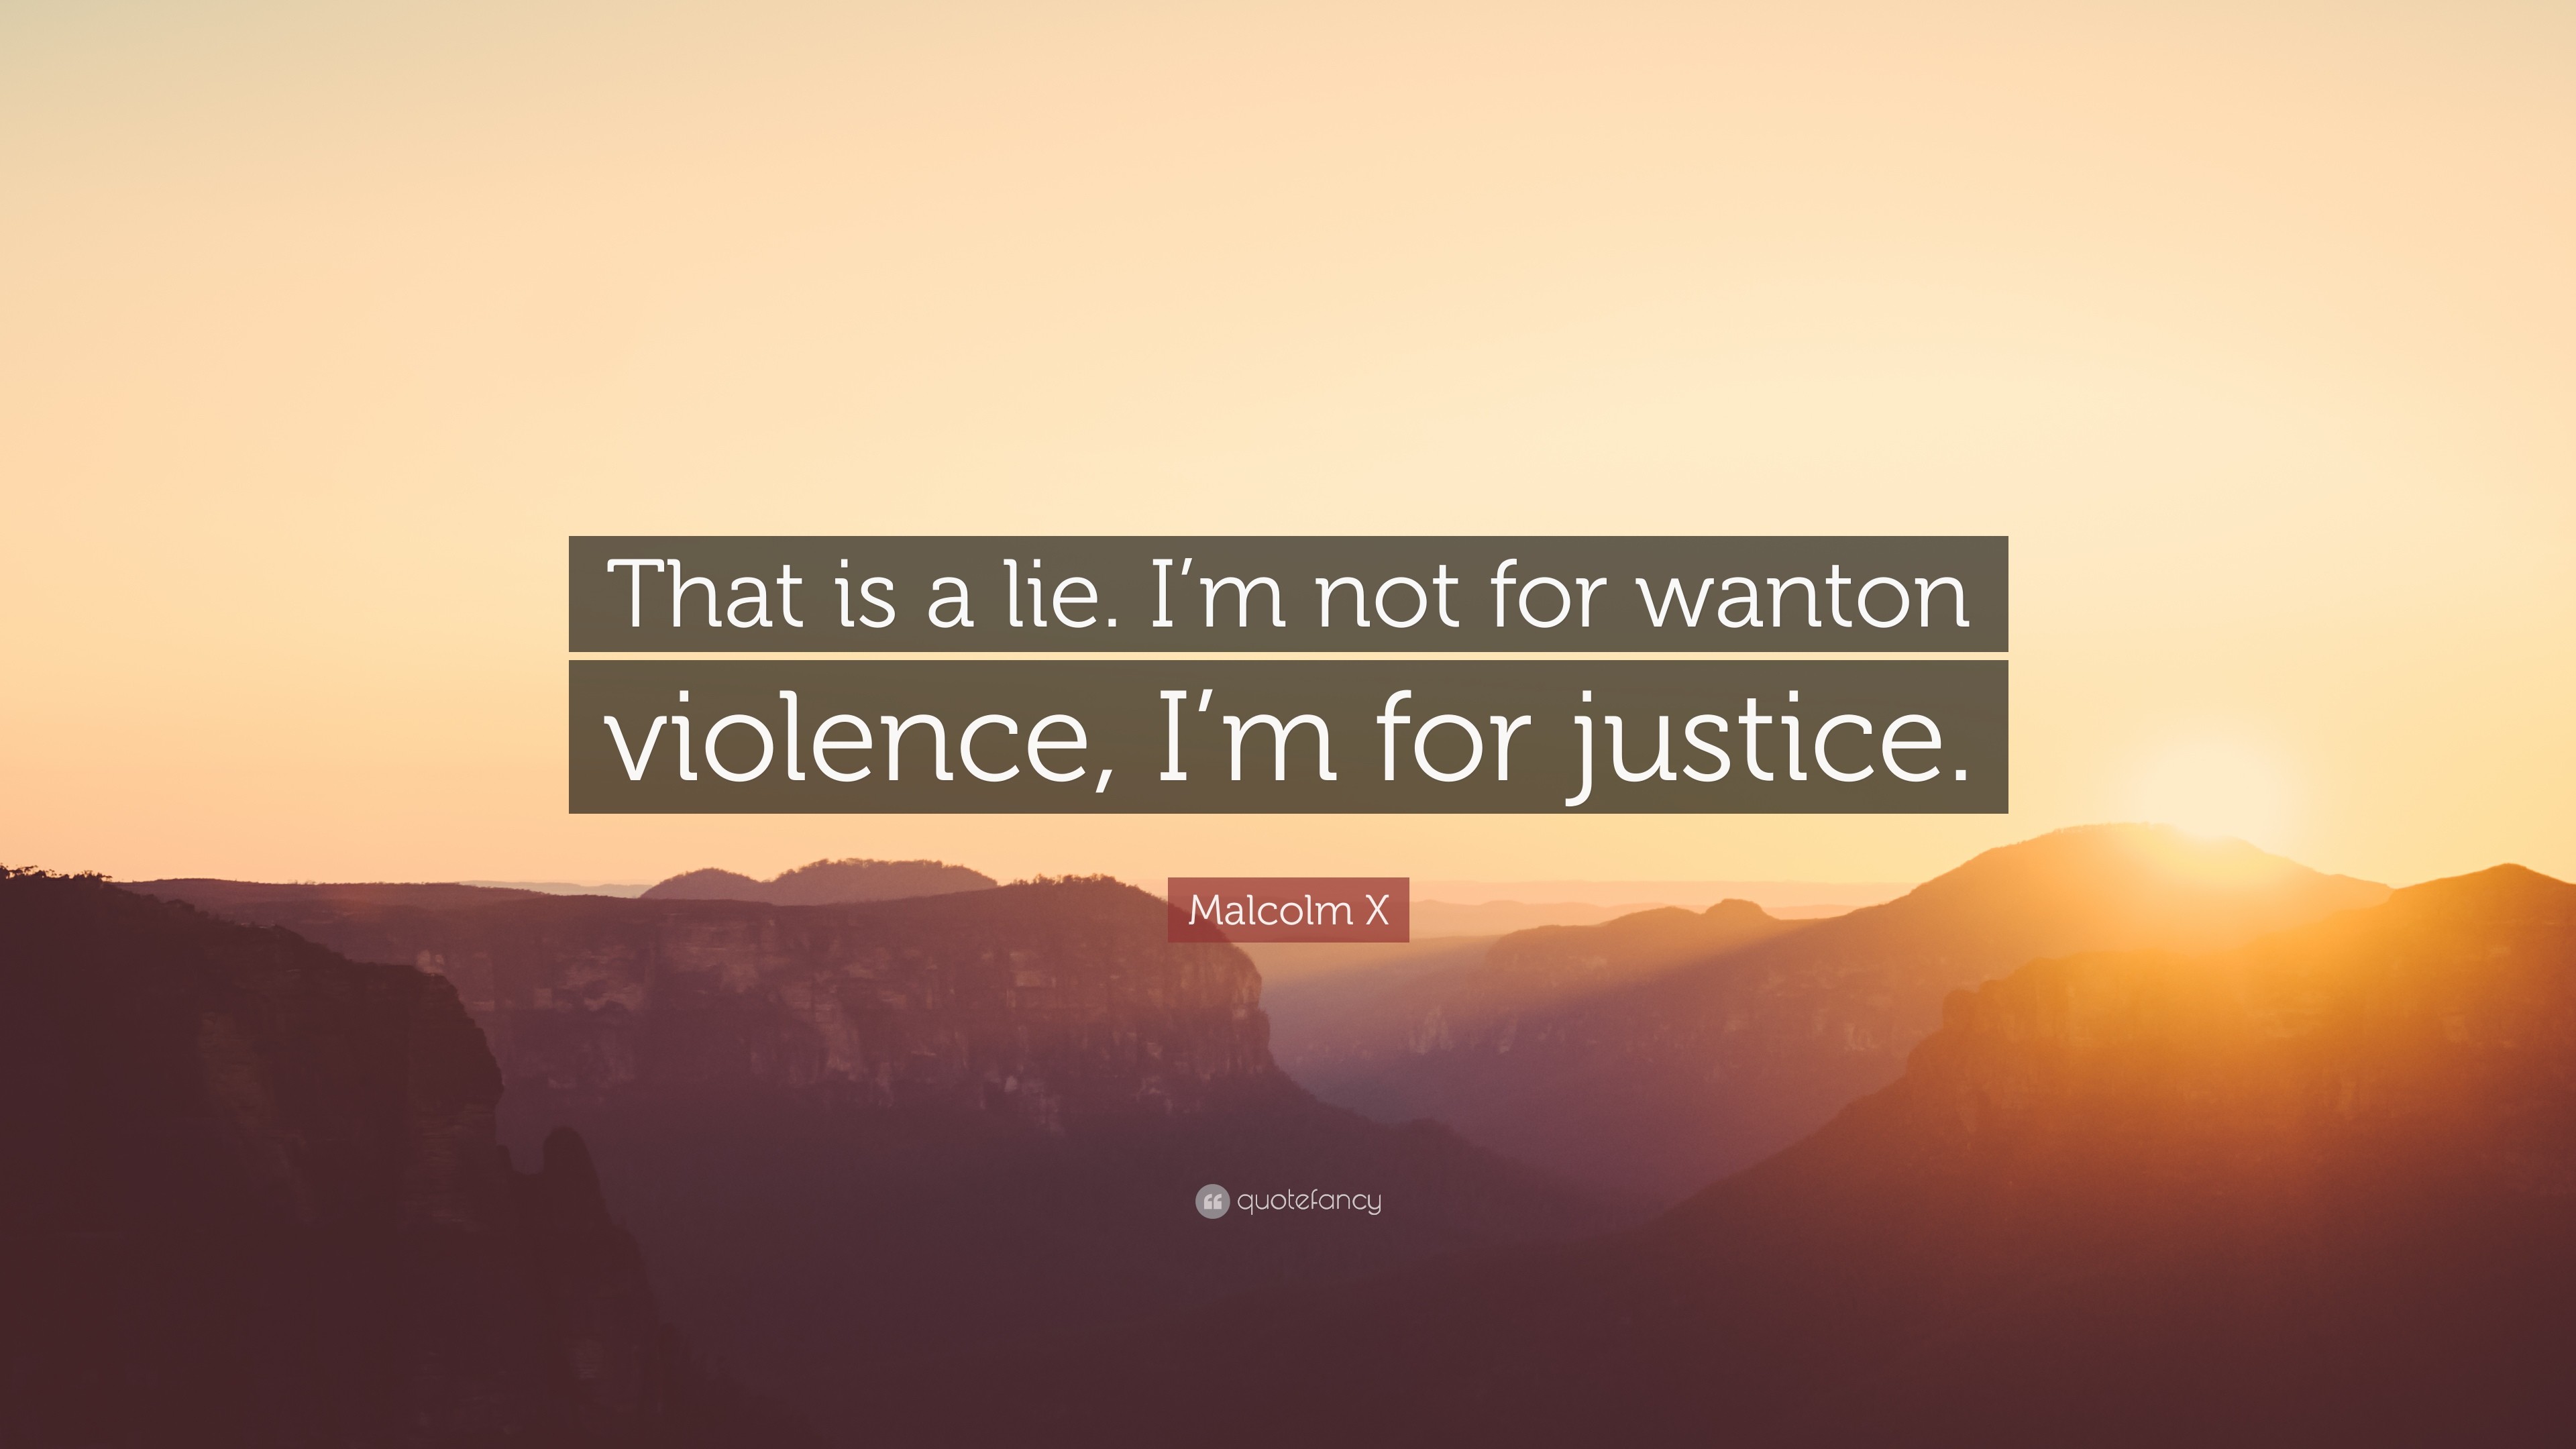 3840x2160 Malcolm X Quote: “That is a lie. I'm not for wanton